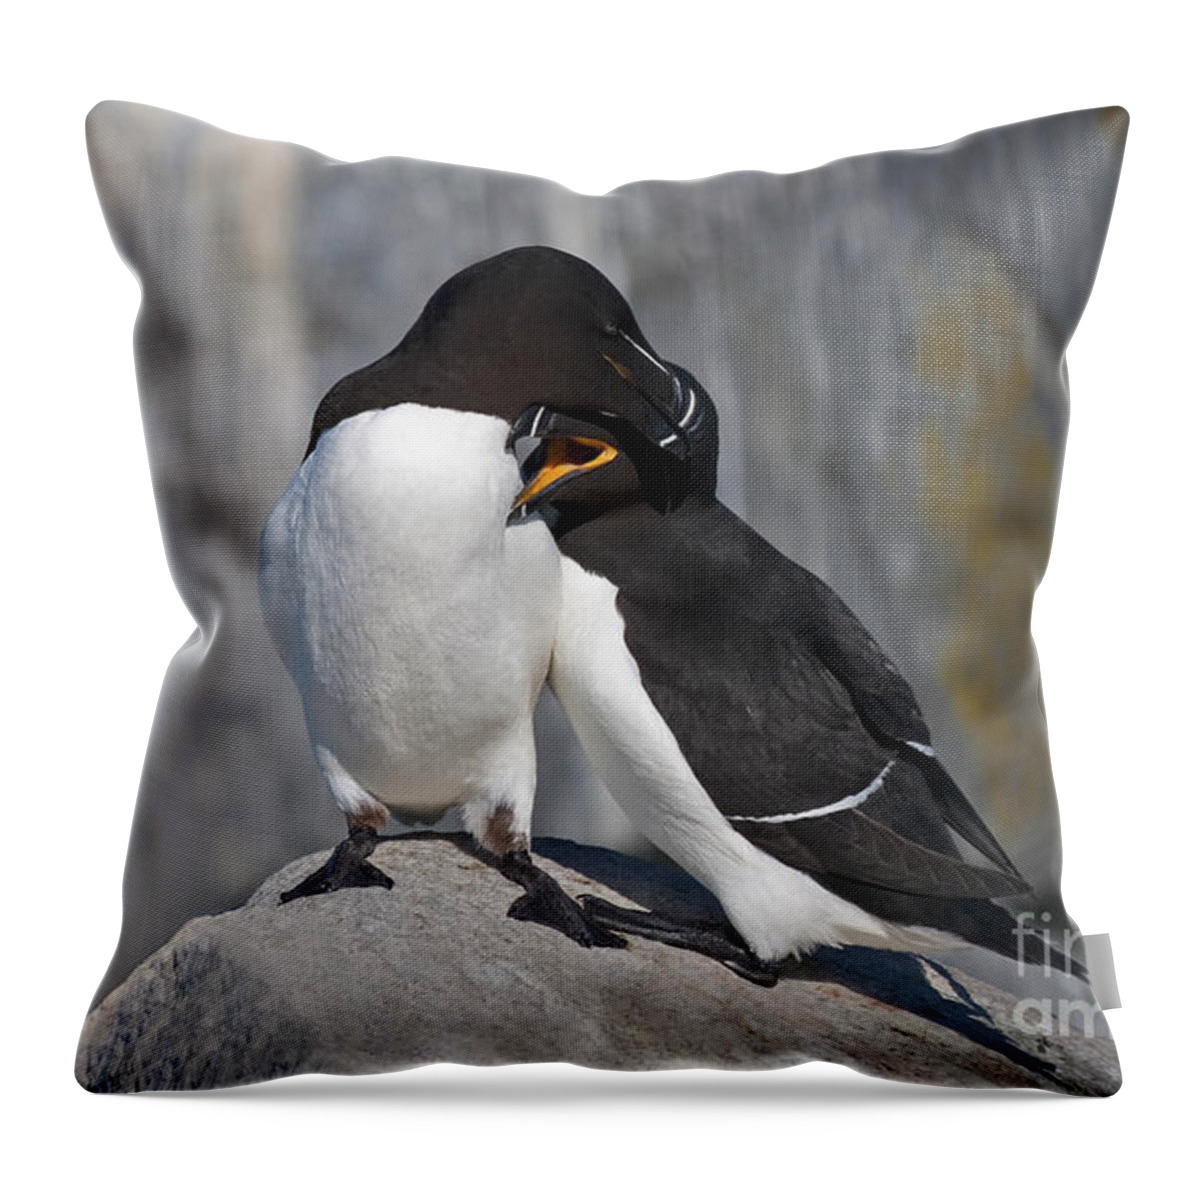 Festblues Throw Pillow featuring the photograph All You Need is Love... by Nina Stavlund